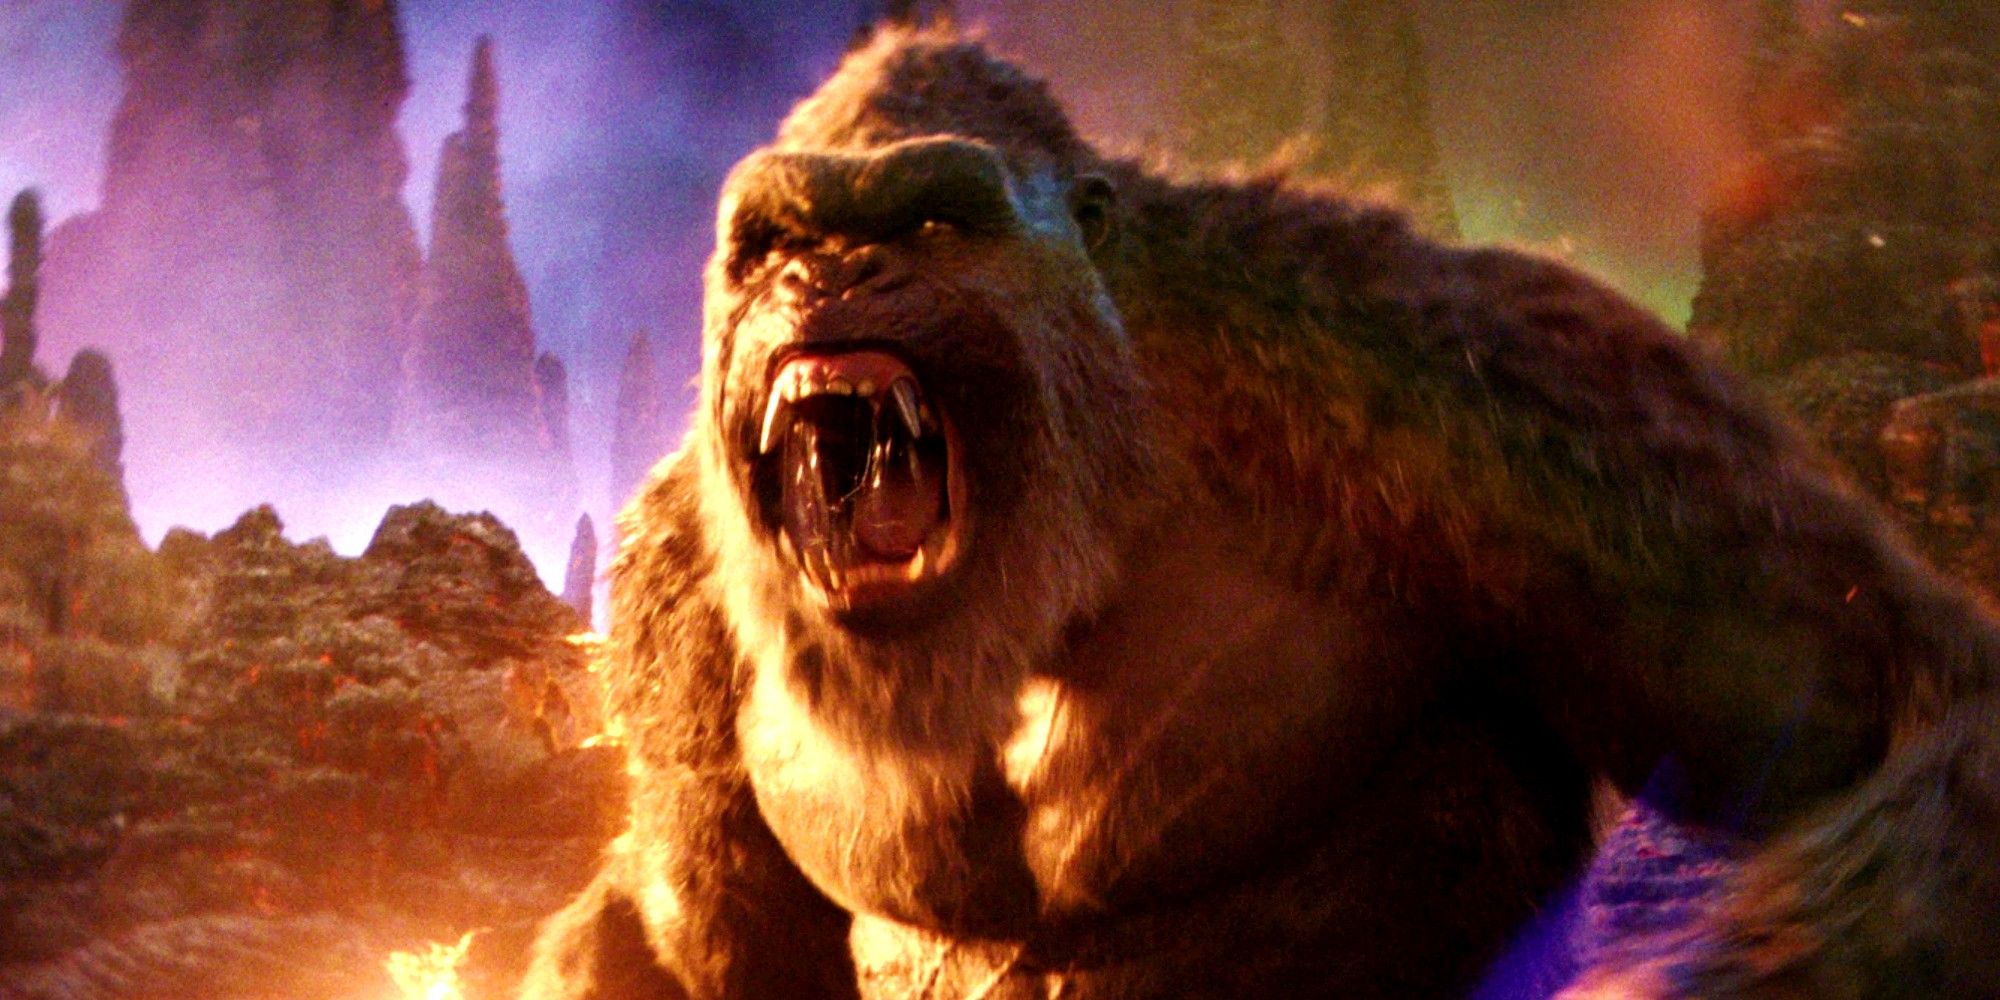 Kong roaring inside of a cave